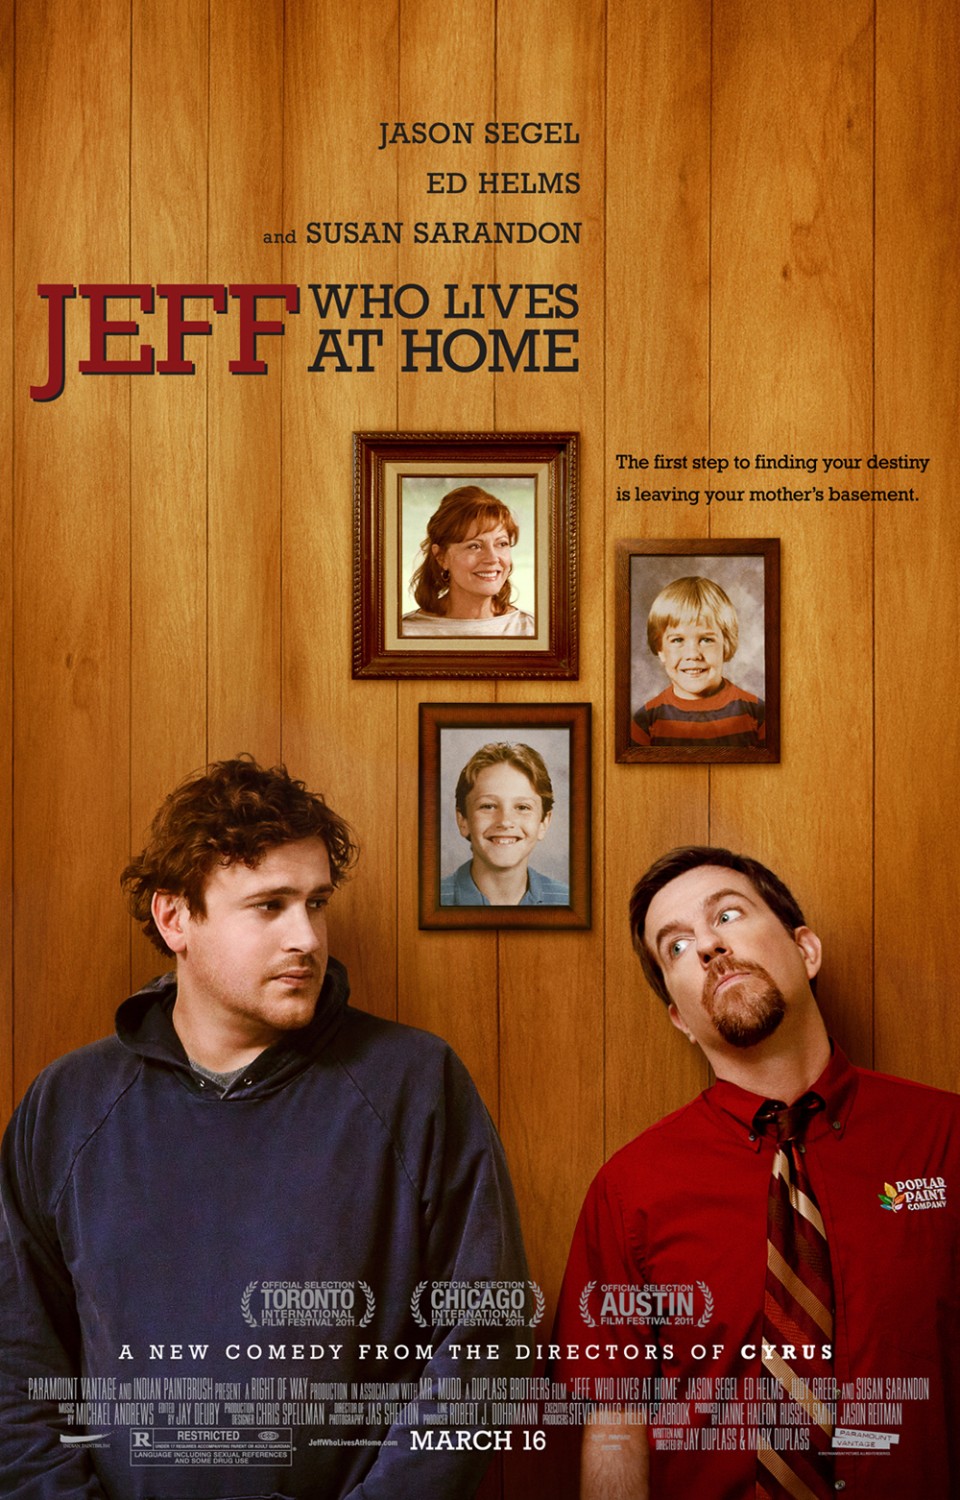 Extra Large Movie Poster Image for Jeff Who Lives at Home 